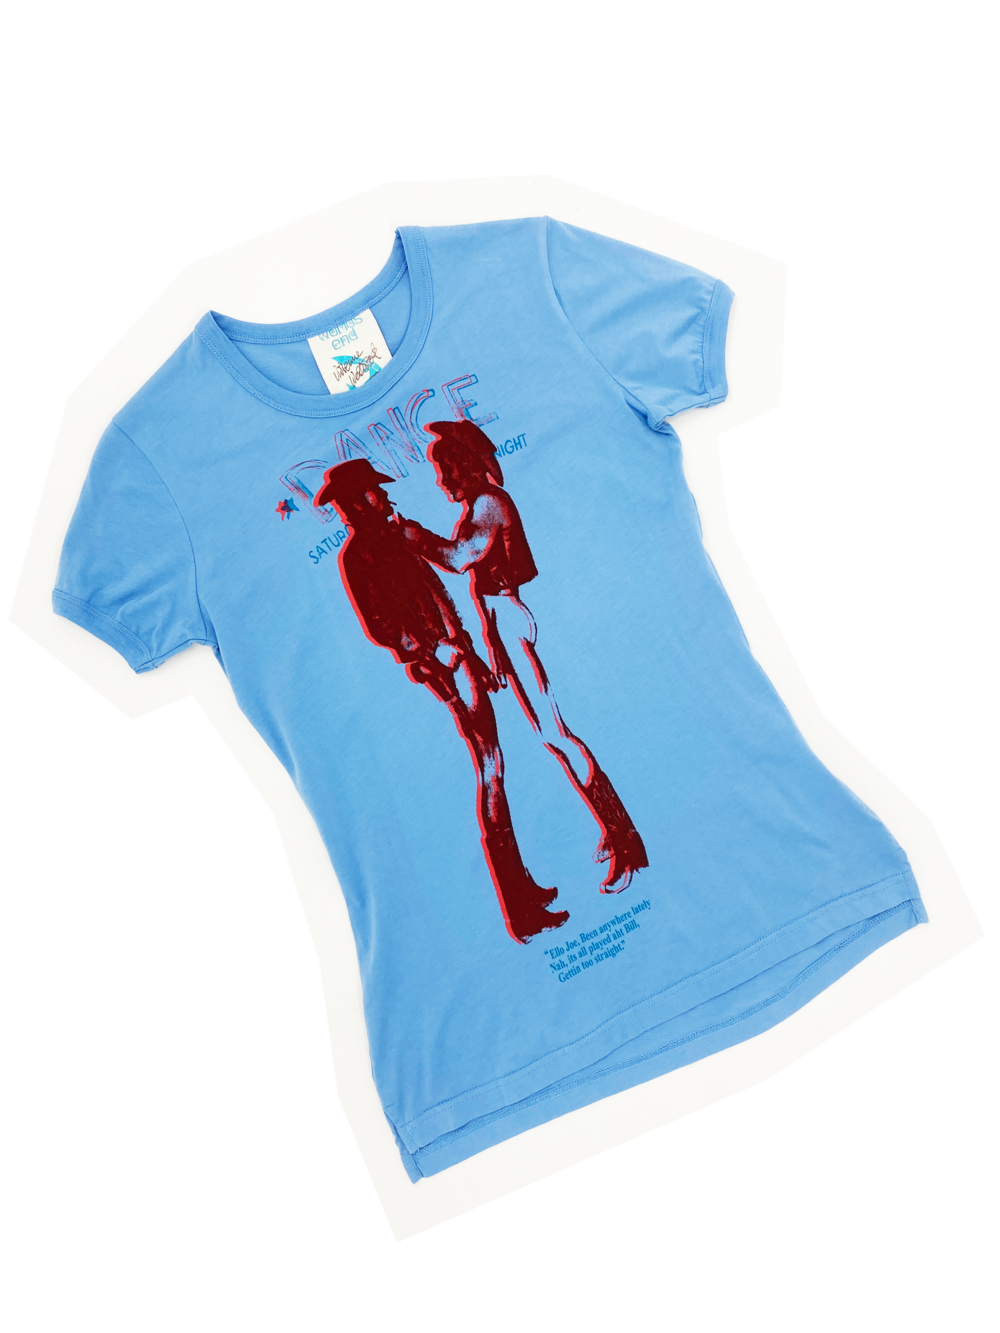 Completely dry ankle shy Vivienne Westwood Worlds End cowboy t-shirt — JAMES VELORIA